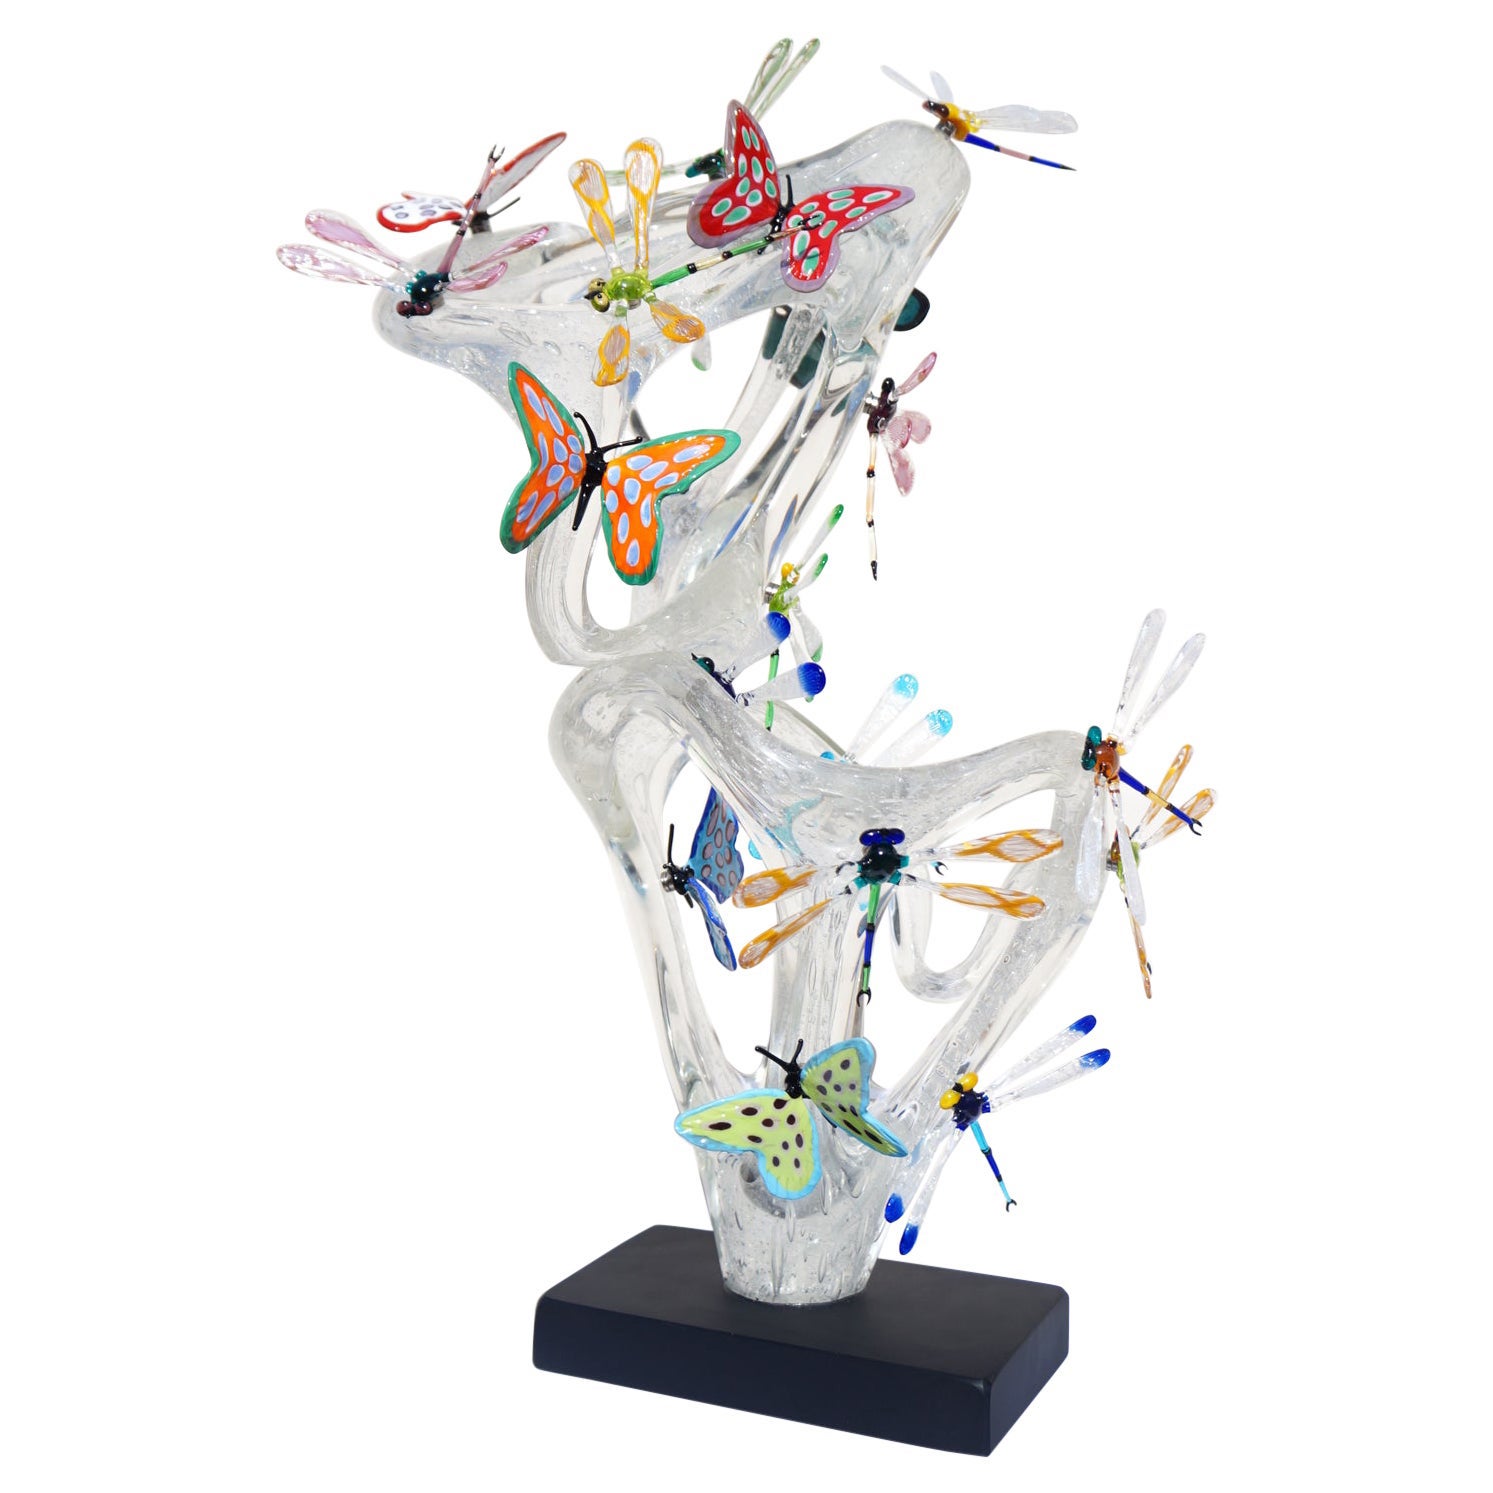 Costantini Diego Modern Murano Glass Sculpture with Butterflies & Dragonflies For Sale